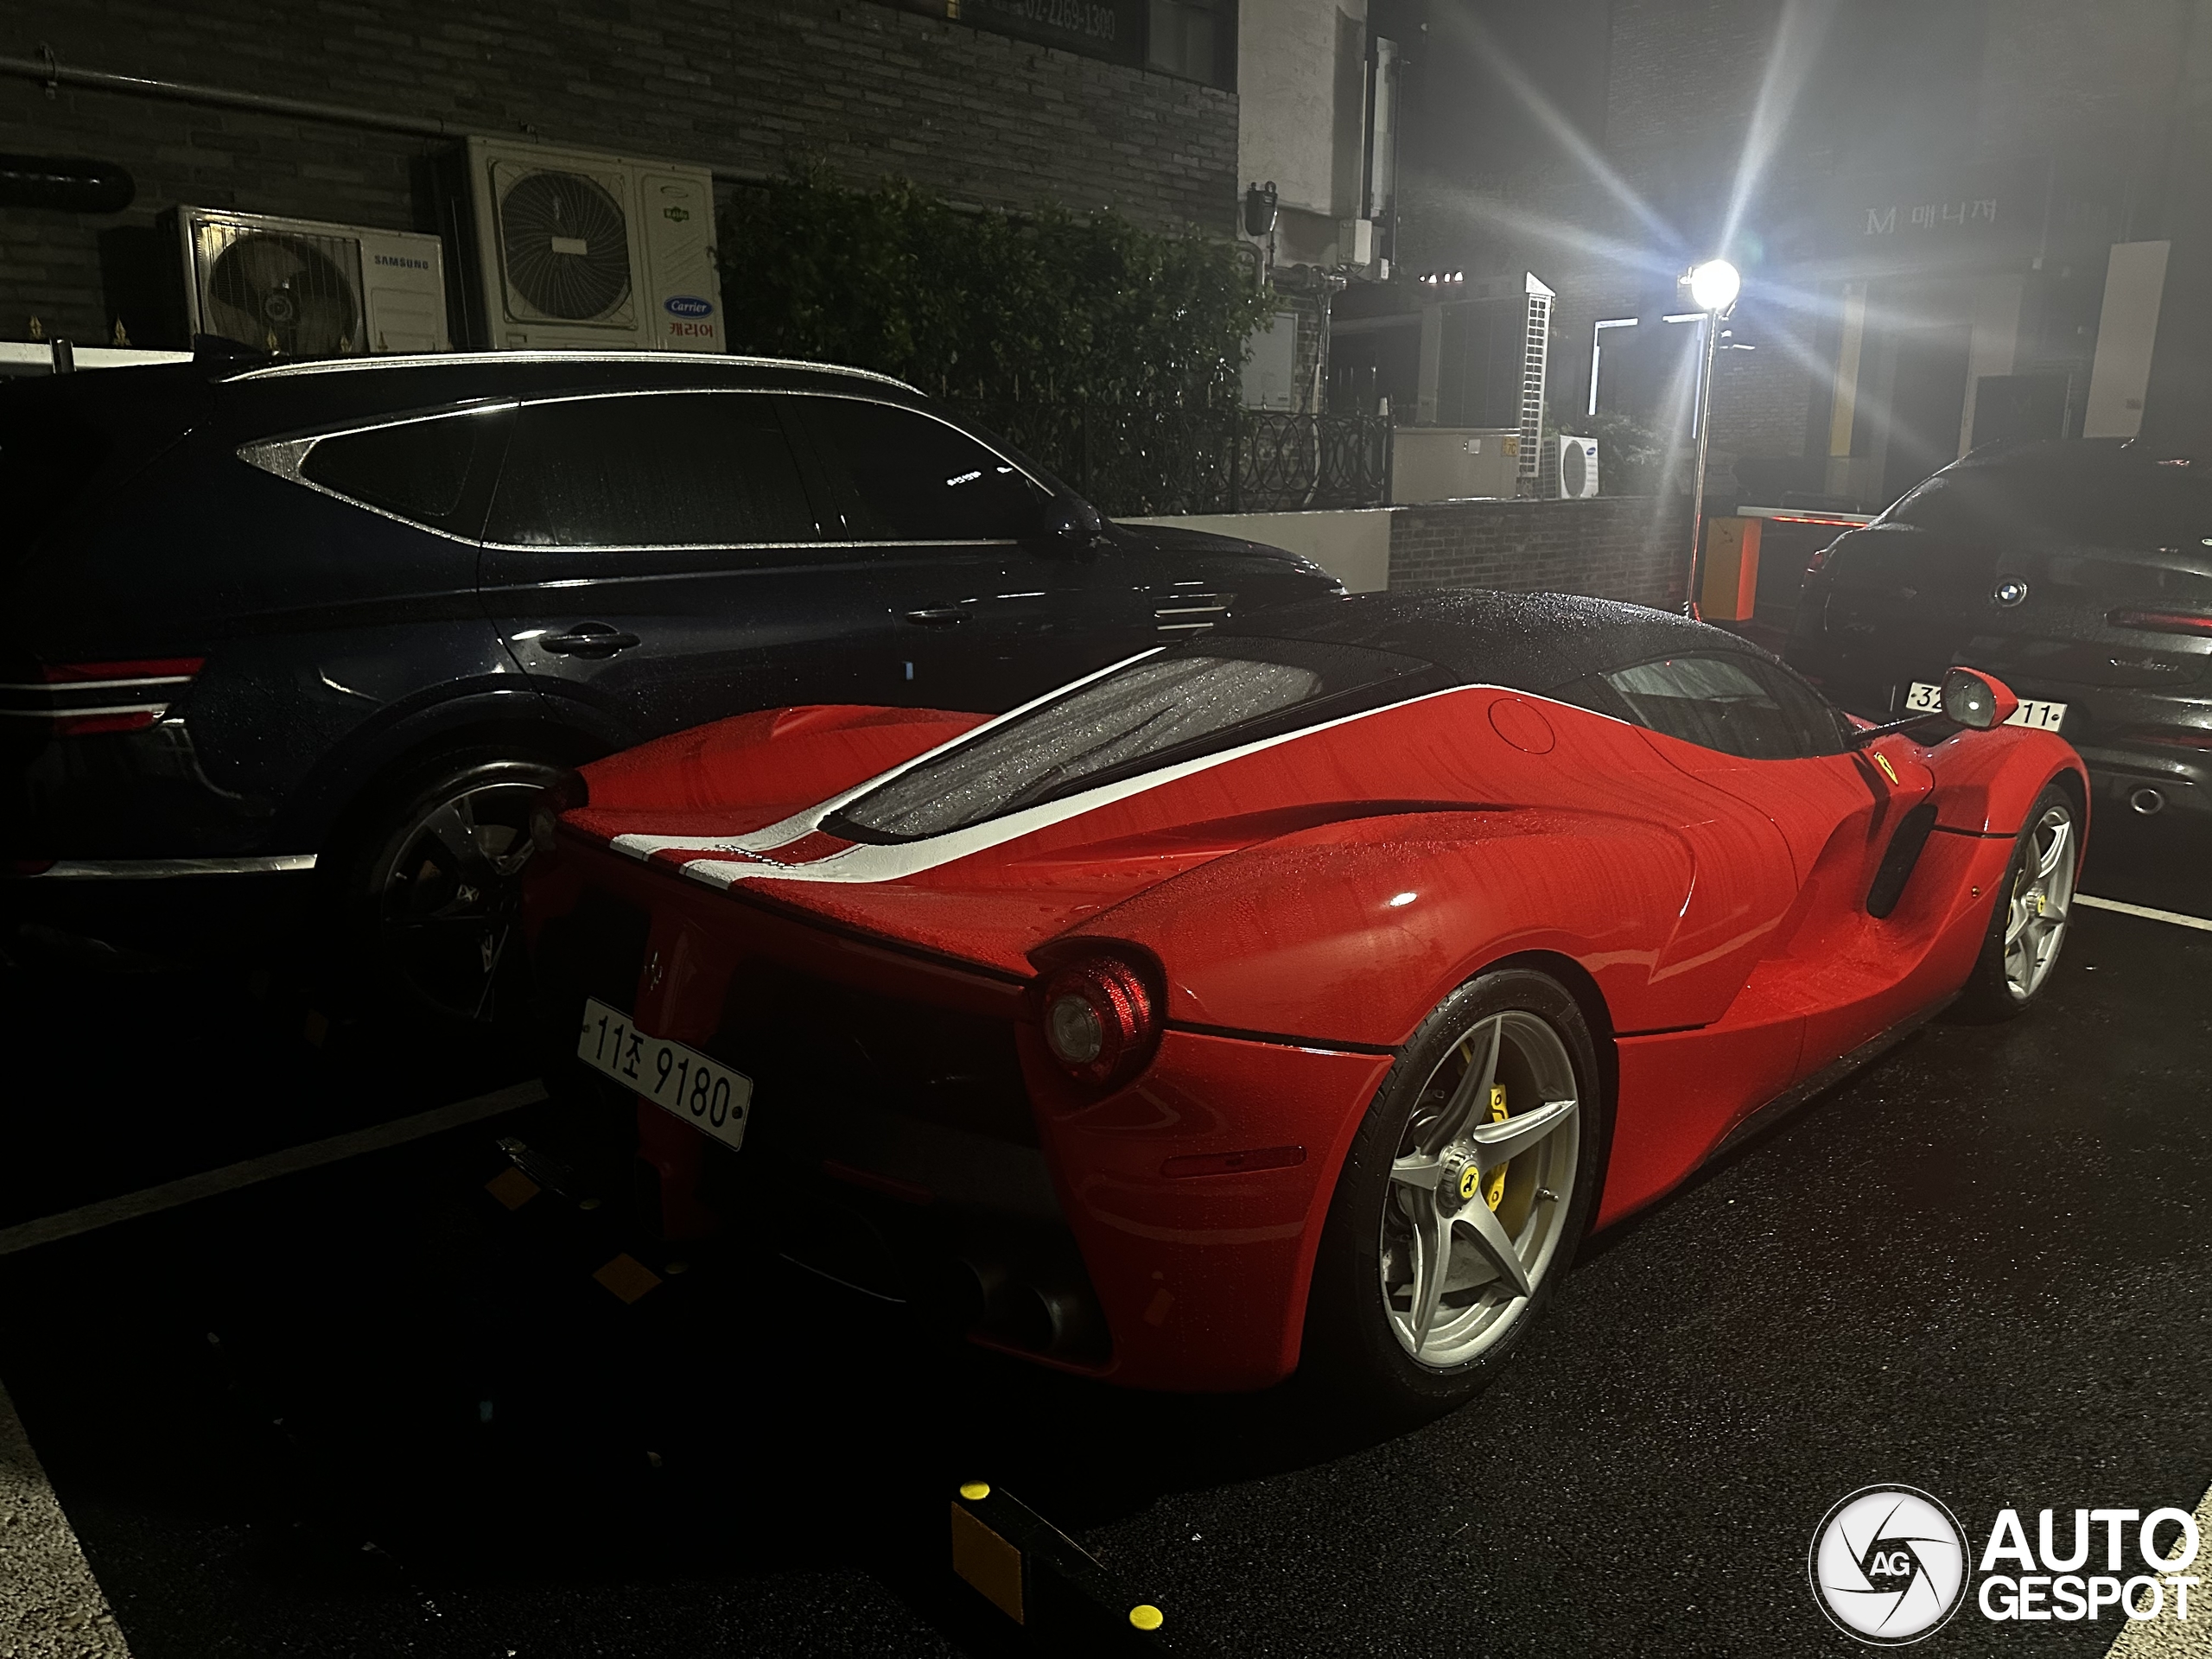 A little detail makes the LaFerrari special